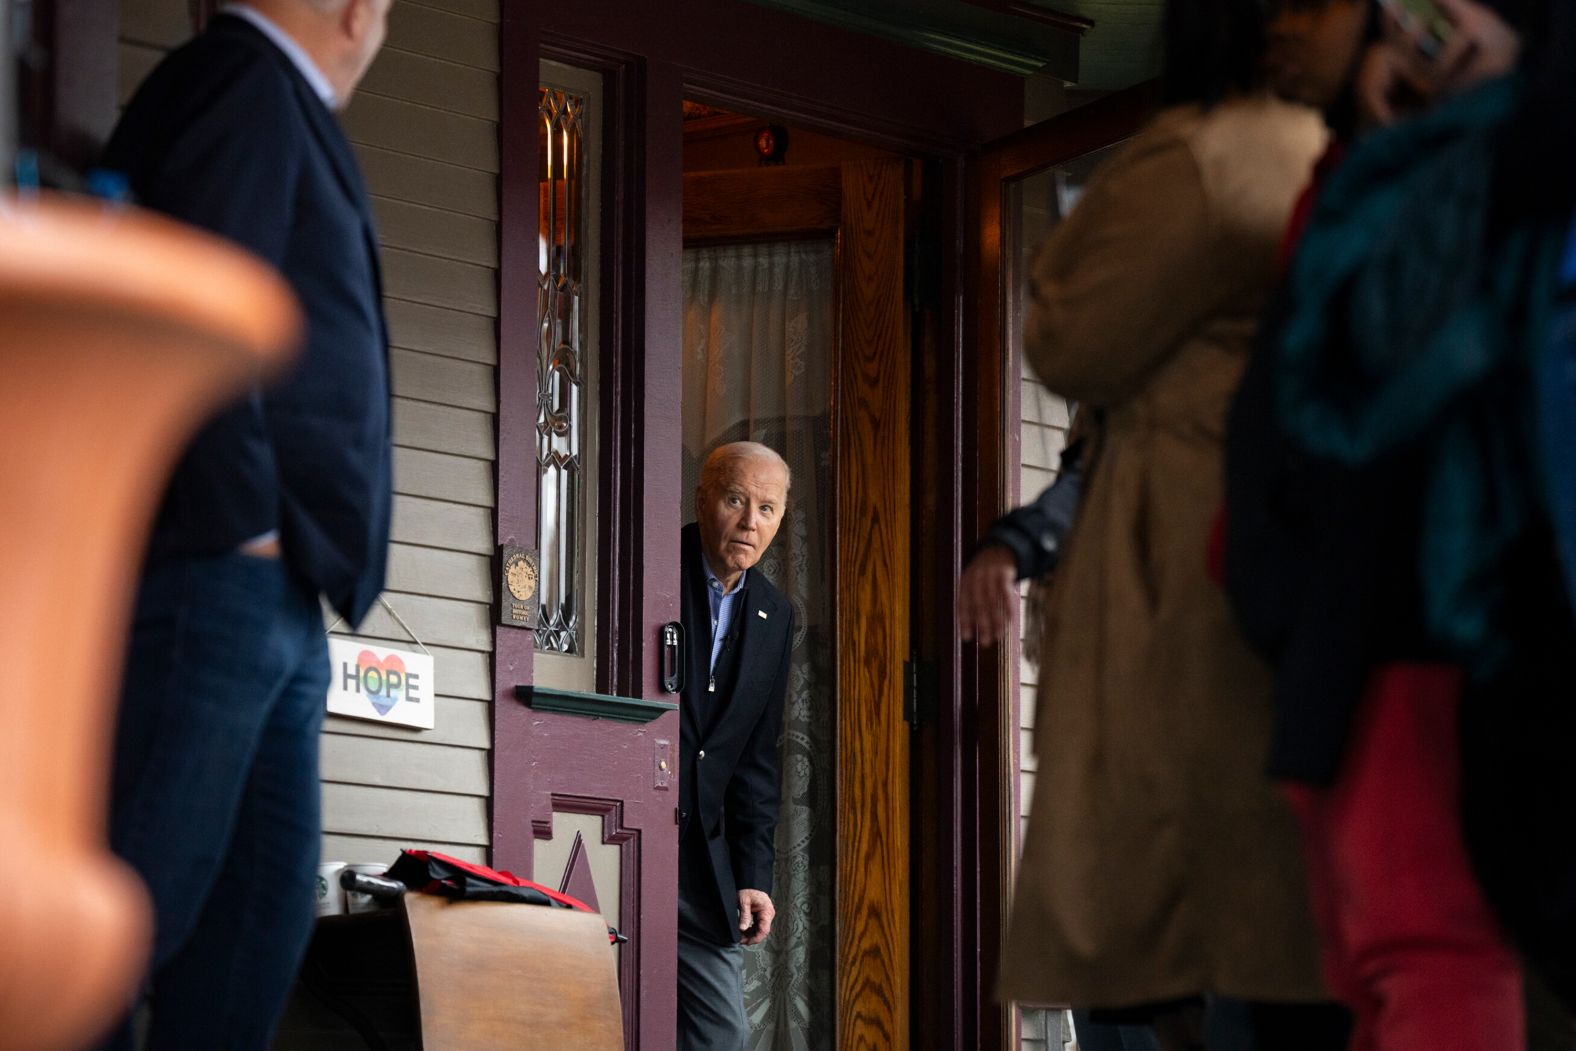 President Joe Biden looks out at a crowd as he arrives to greet people during a campaign event in Saginaw, Michigan, on Thursday, March 14.